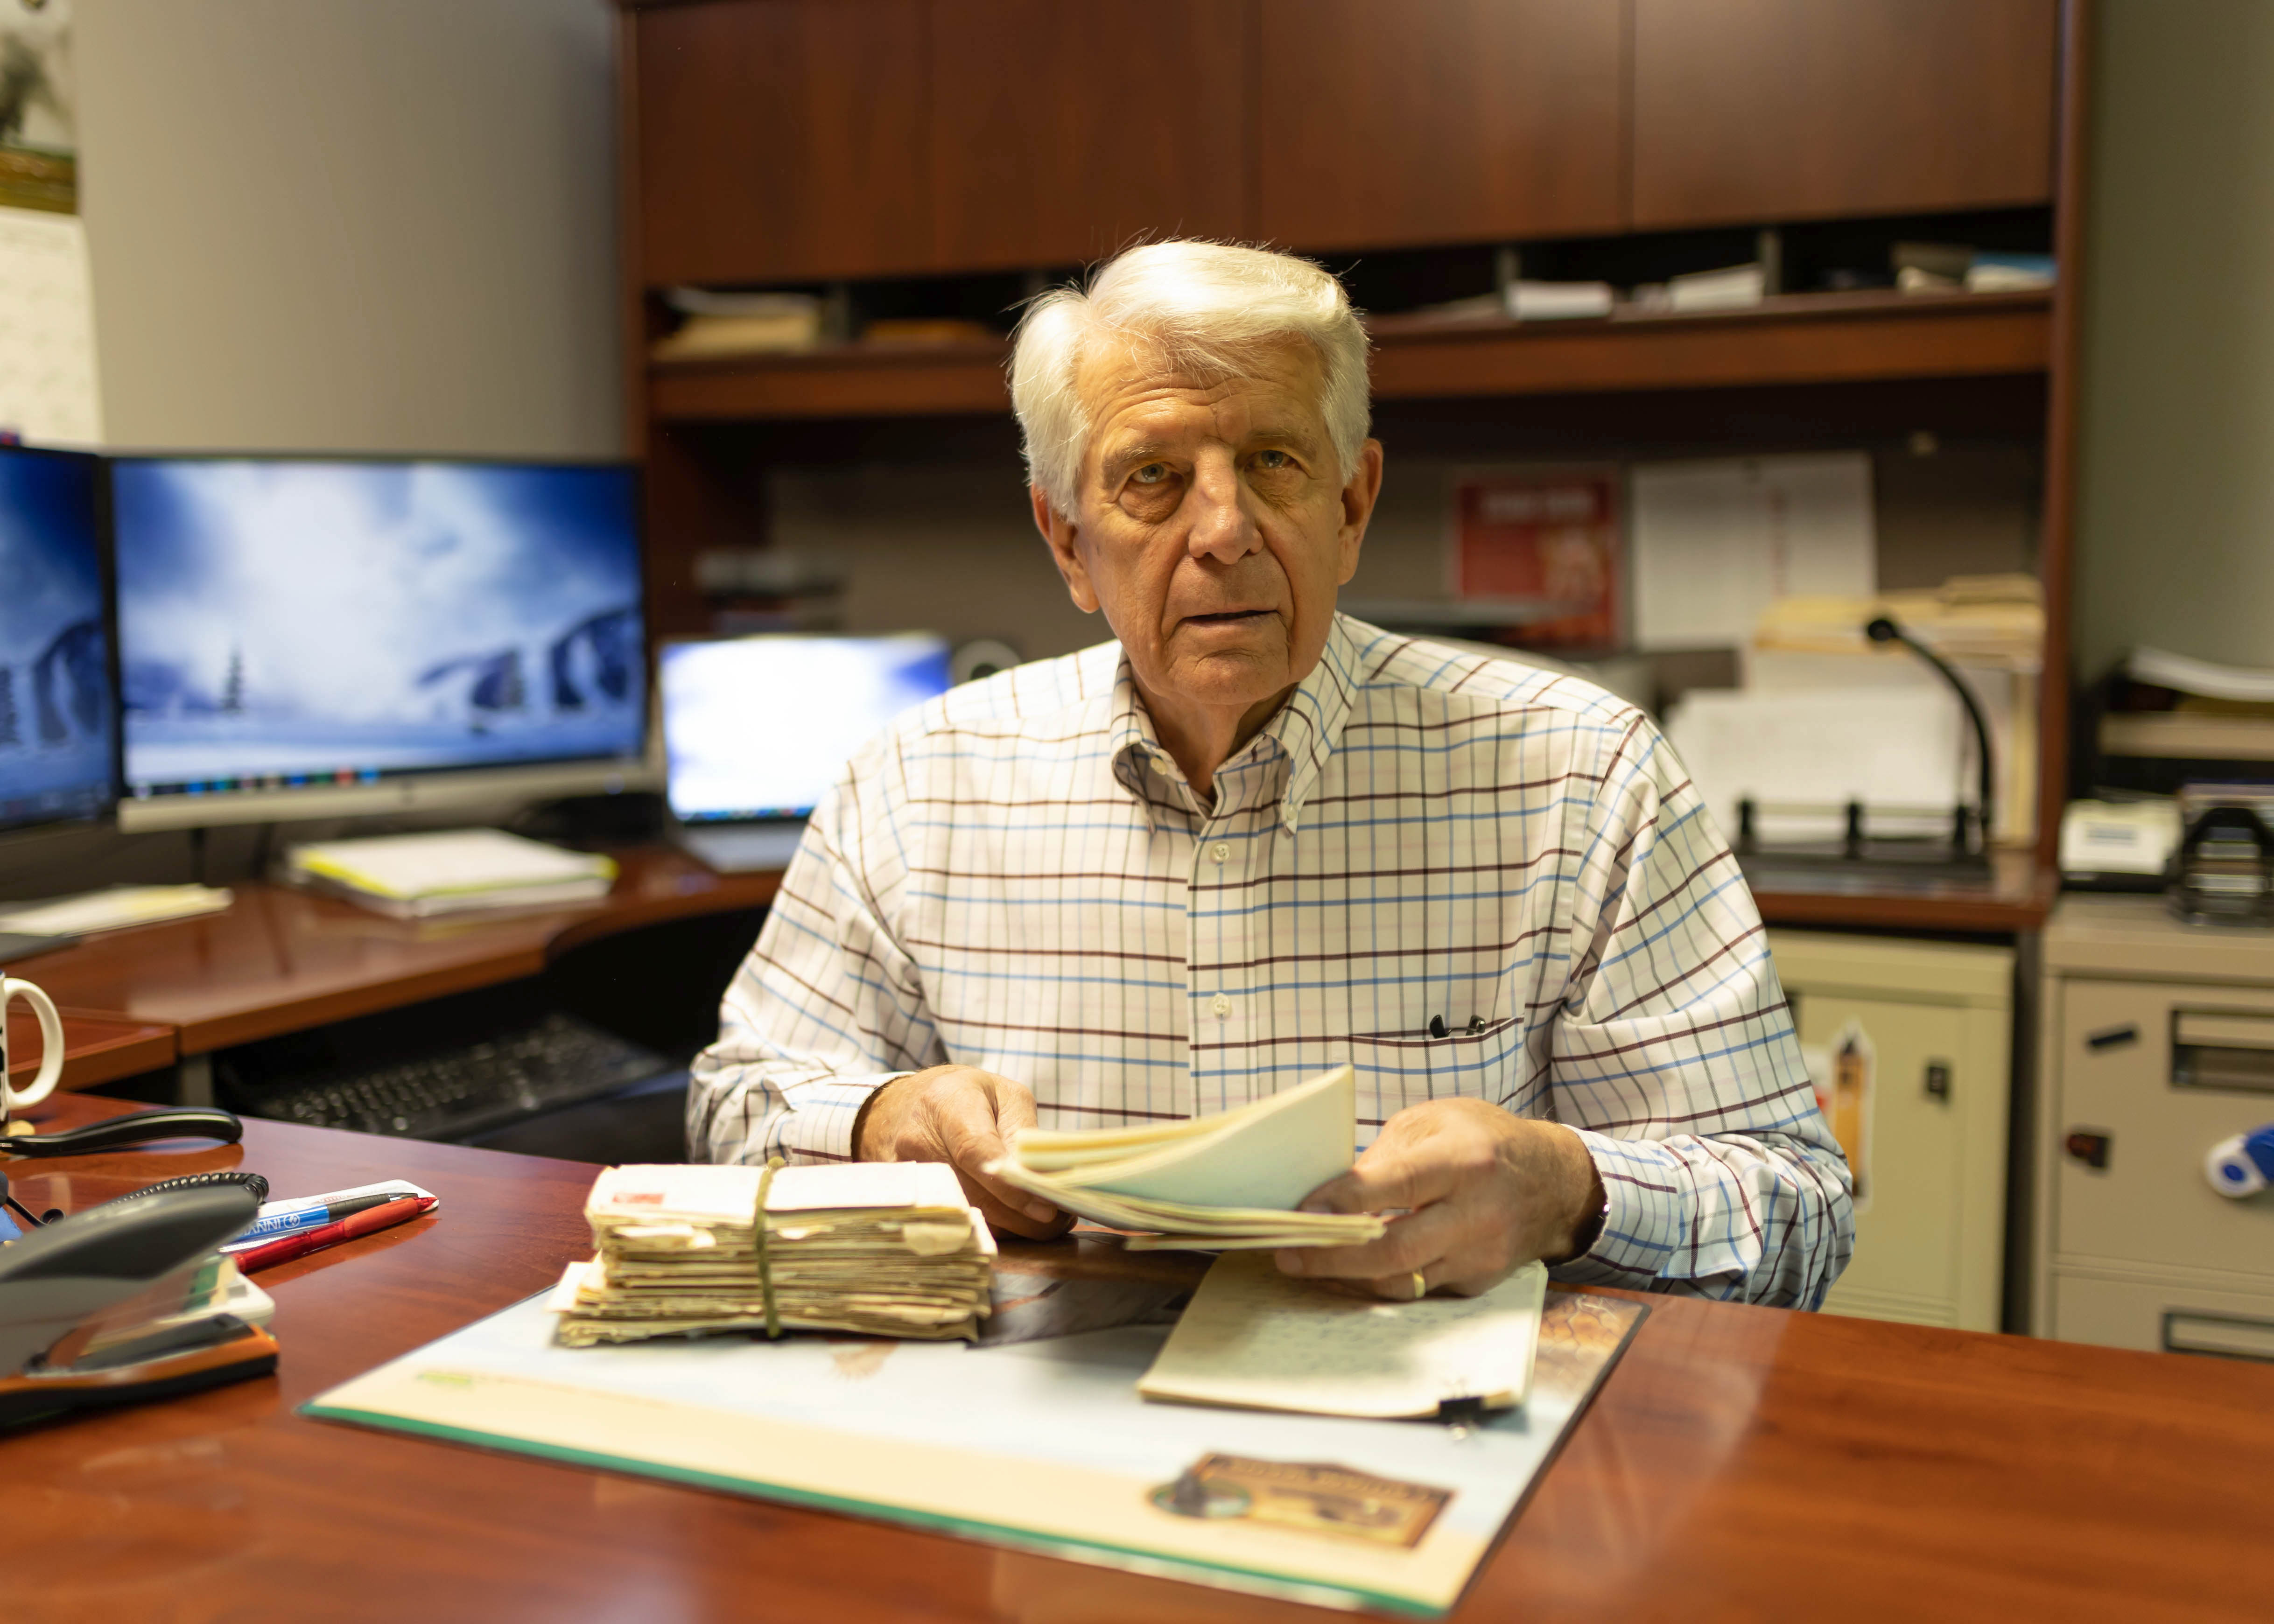 Vietnam veteran sits at his desk with a stack of letter